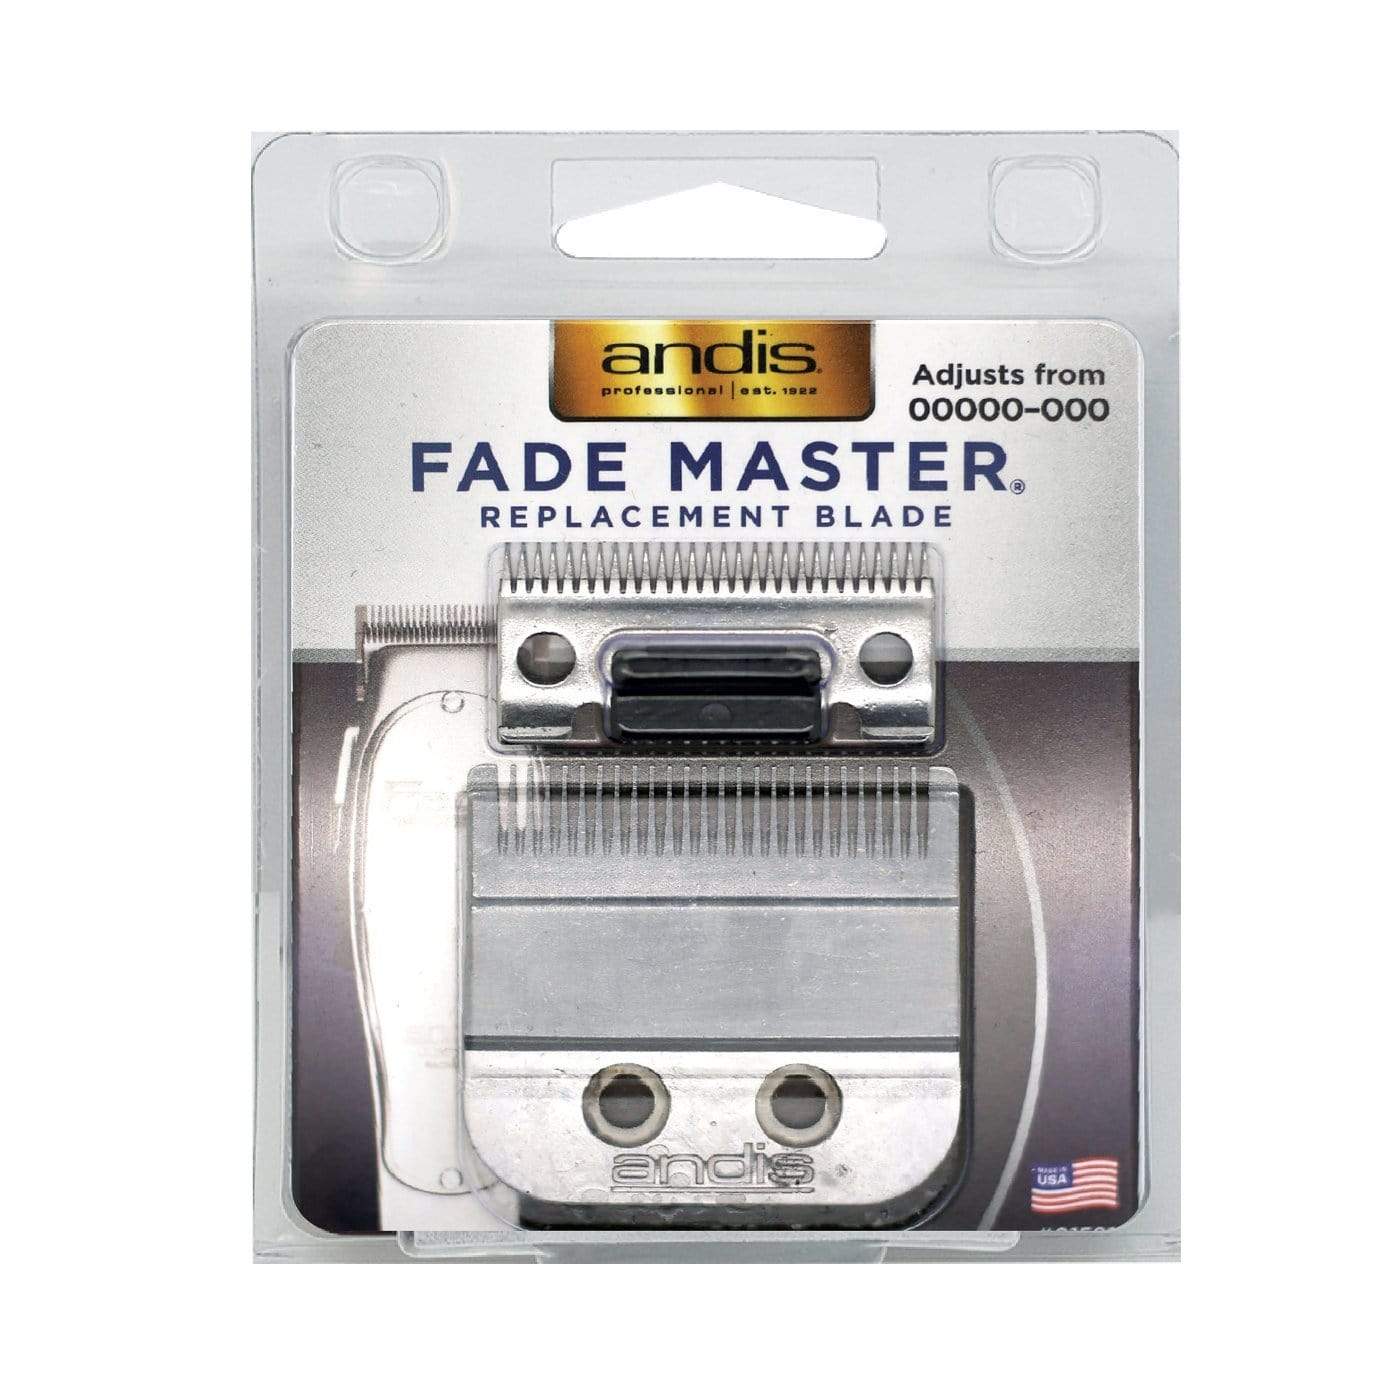 andis fade master review